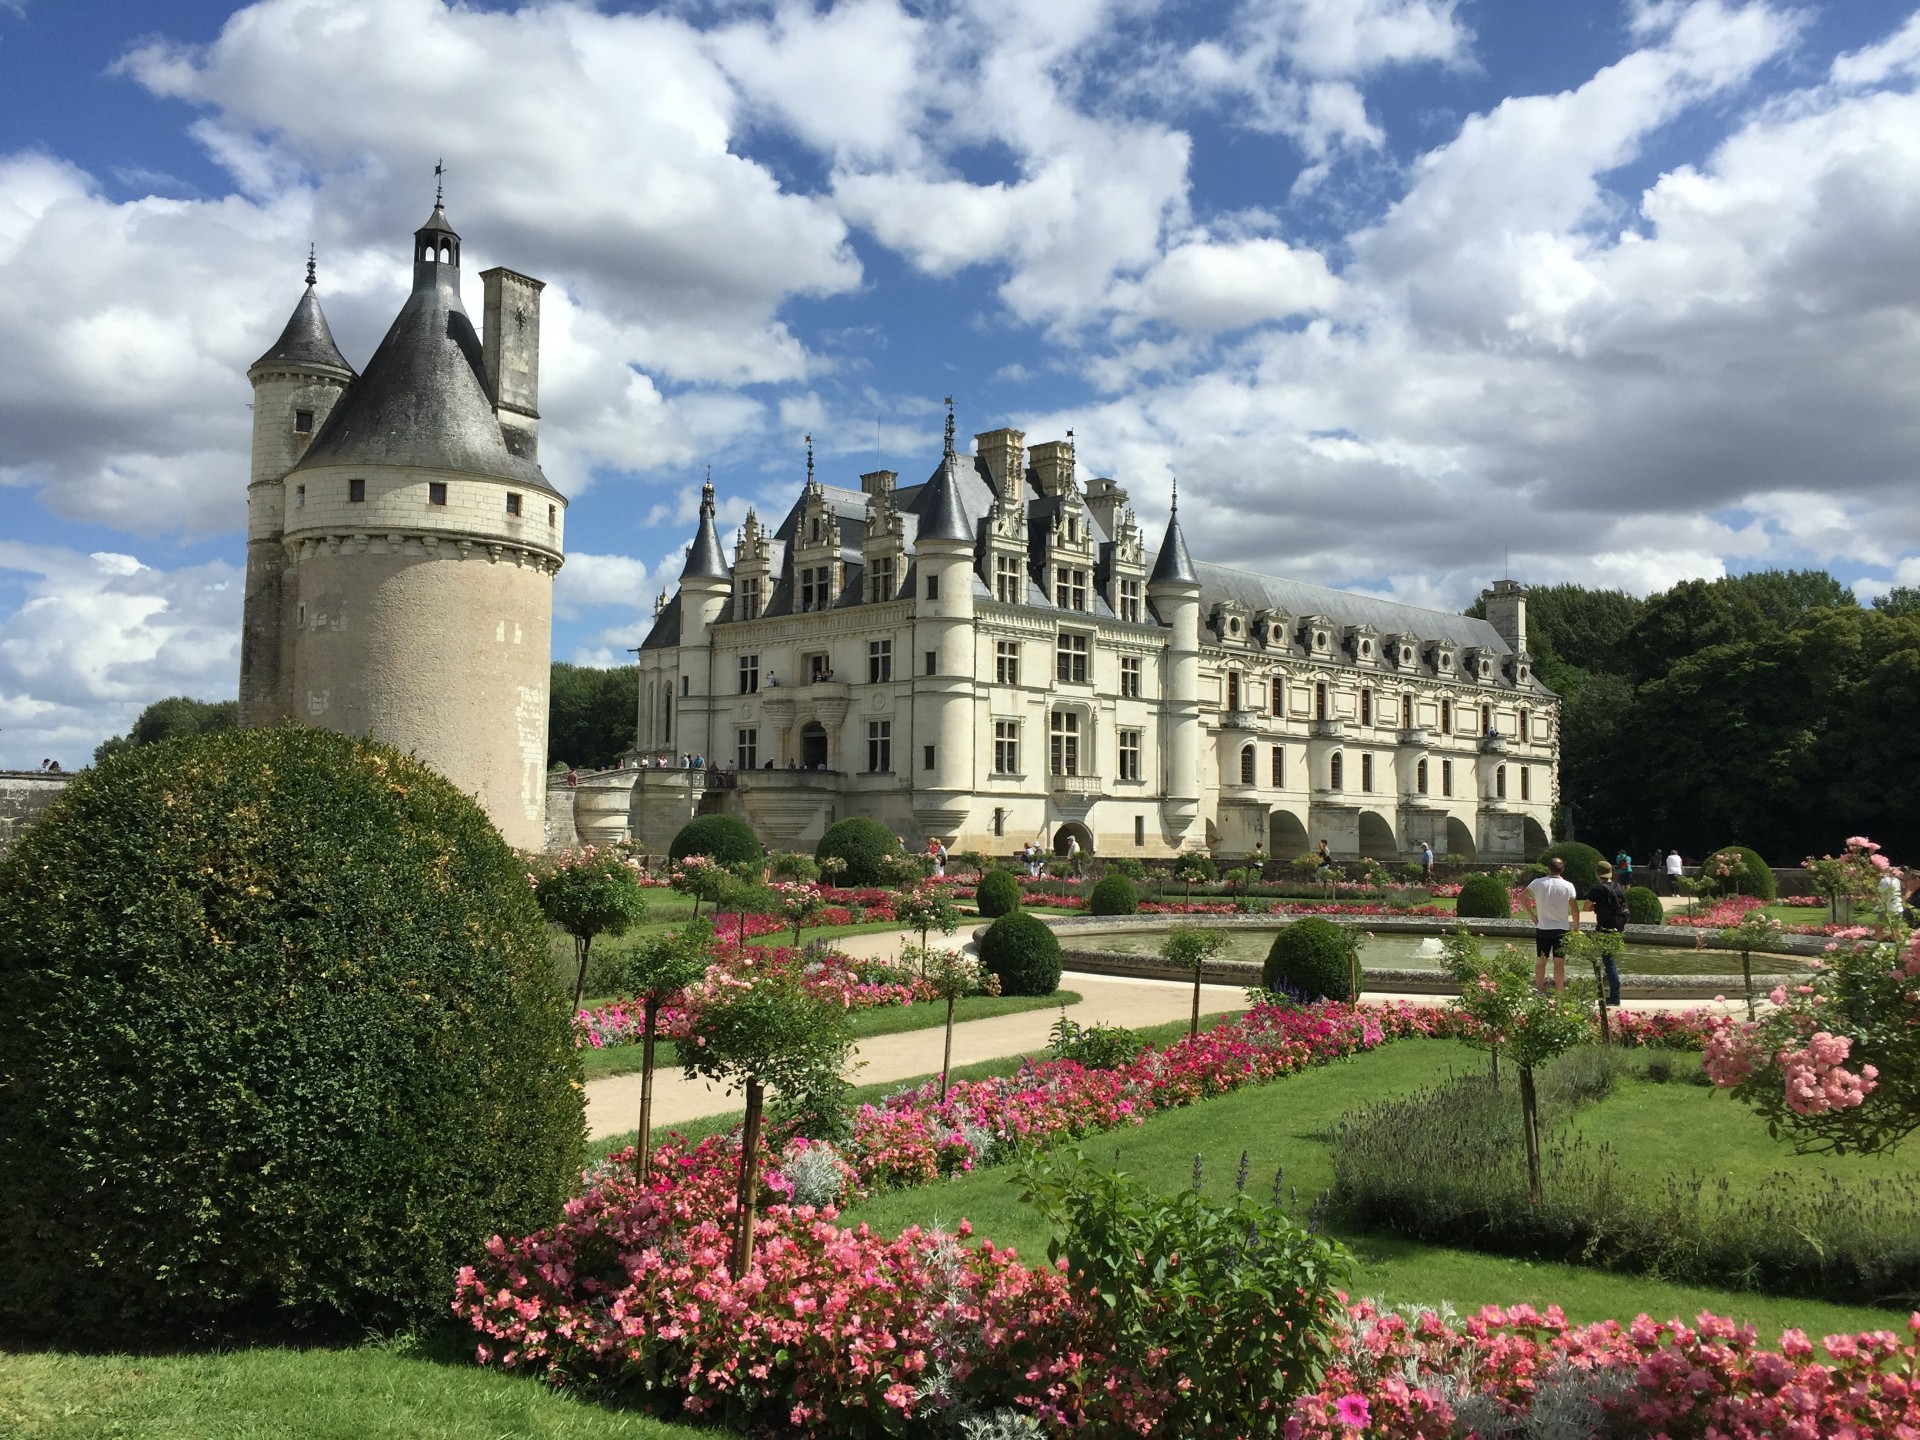 Gardens of the Loire Valley, France - Self-Guided Day Trip